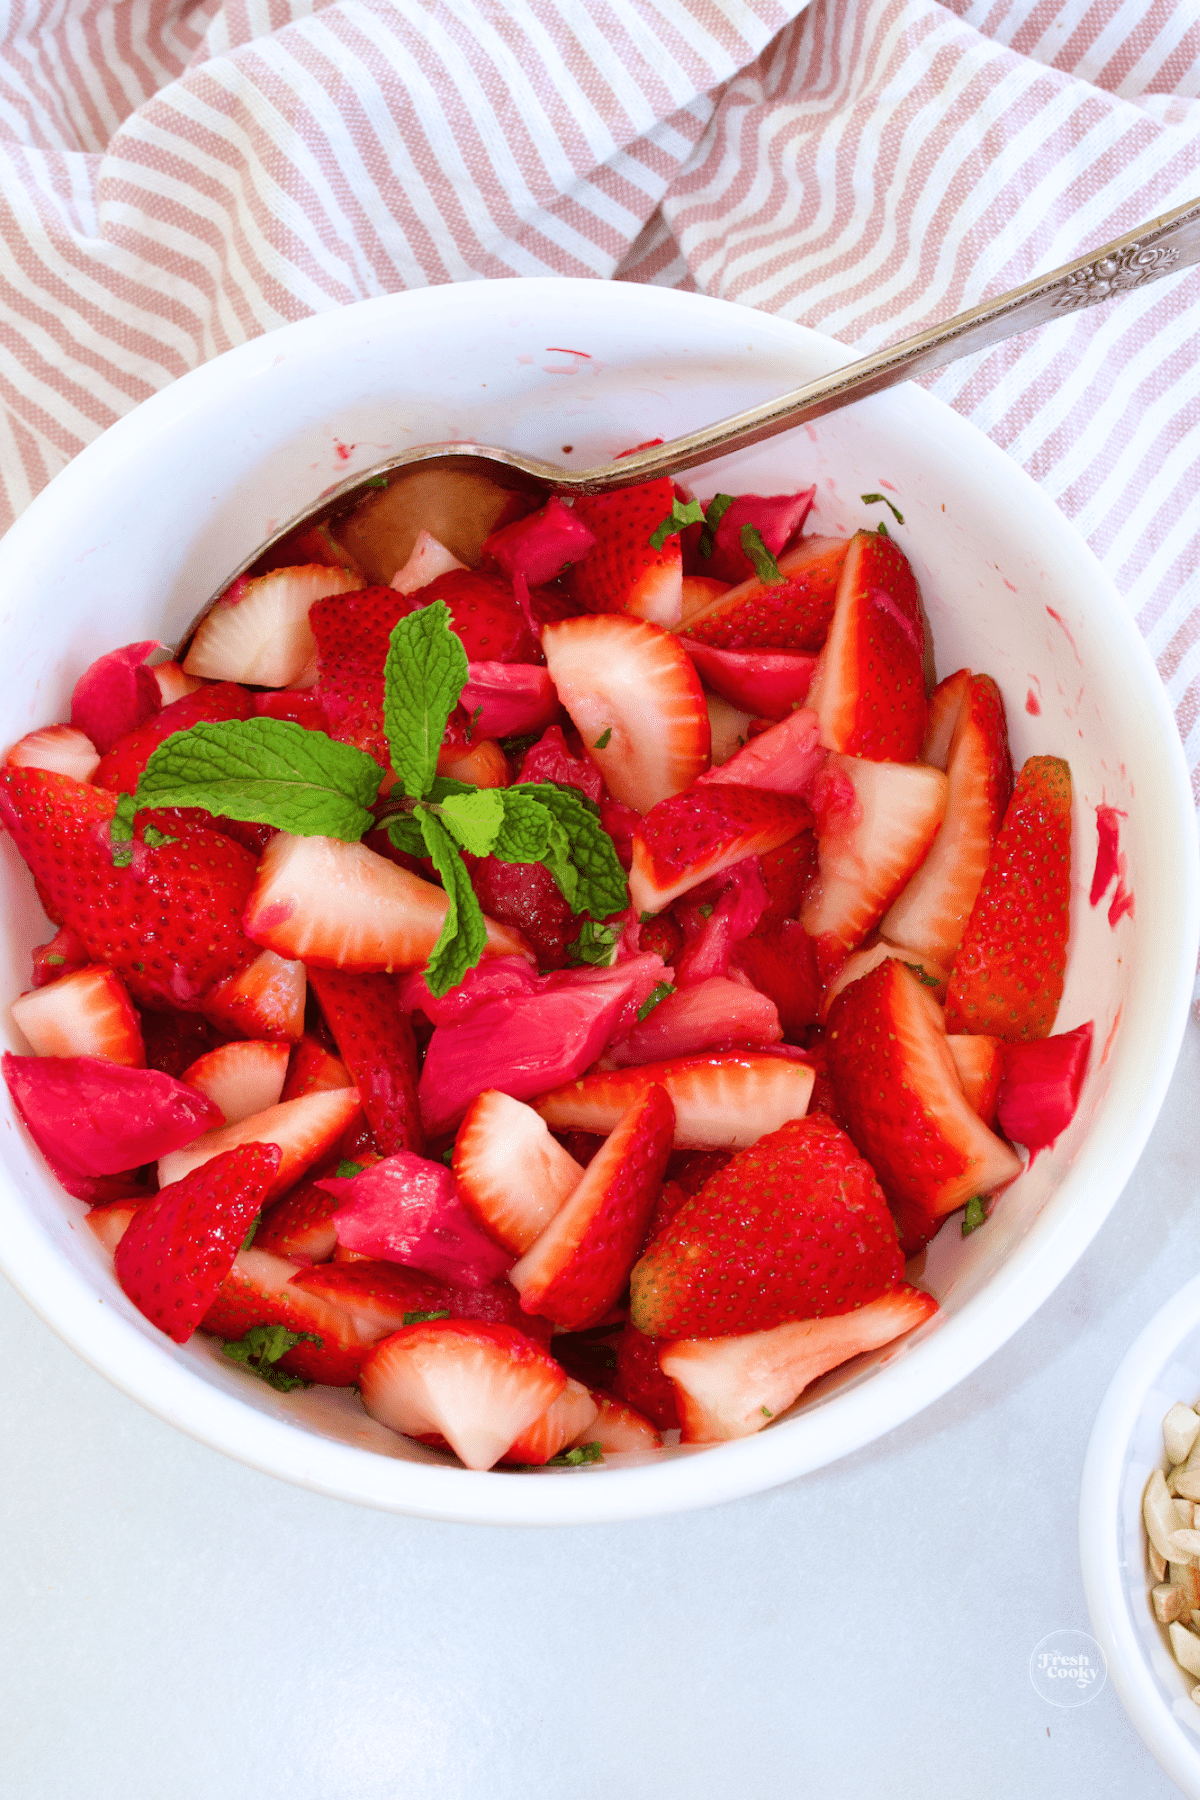 Strawberry Rhubarb Salad in a bowl with slivered almonds nearby.